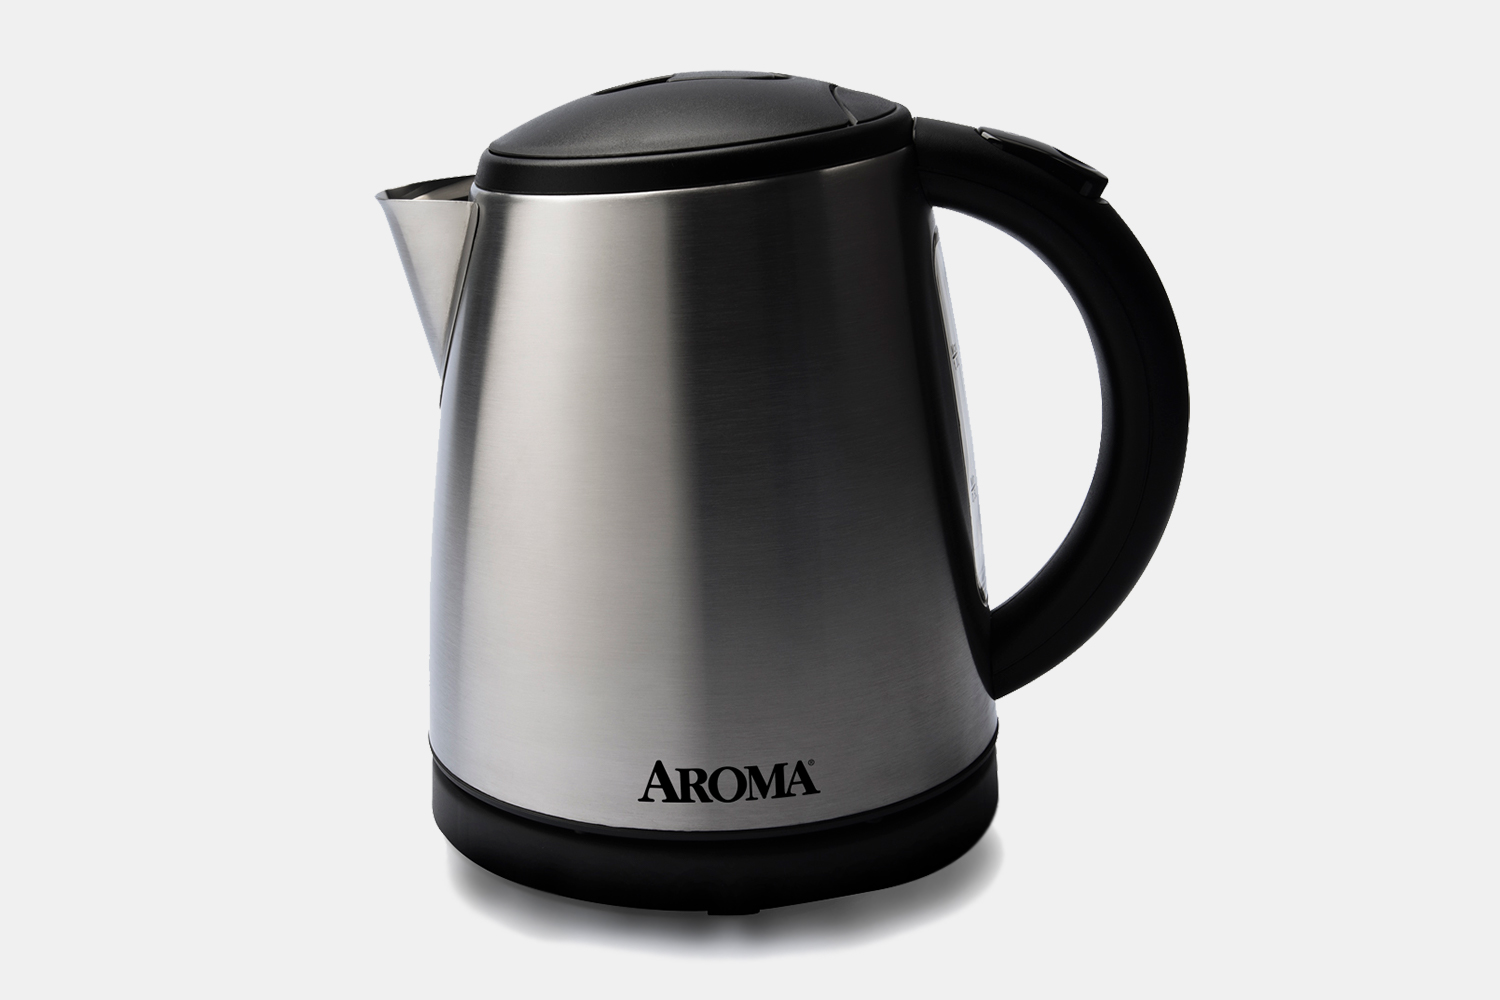 personal electric kettle